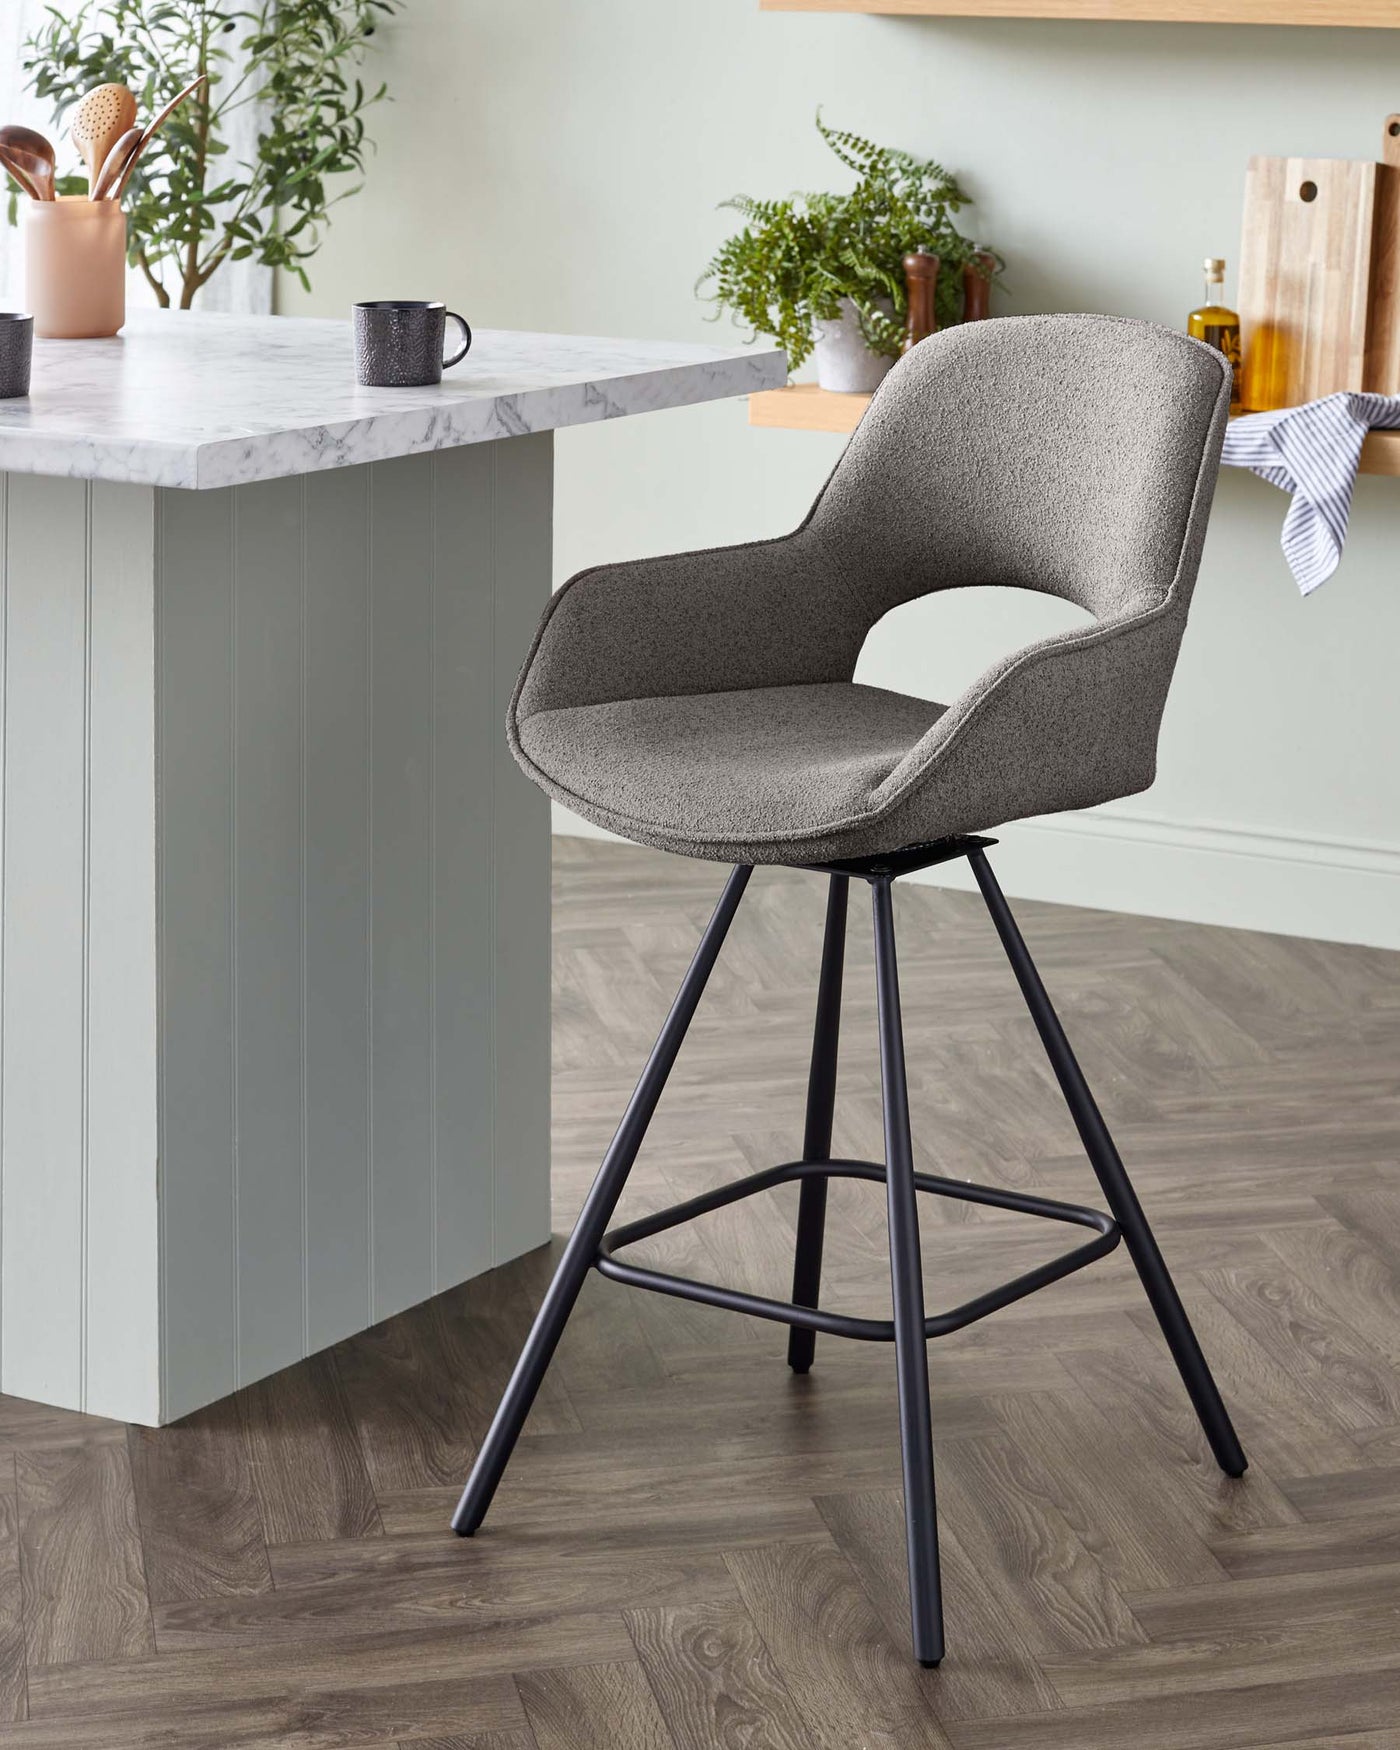 Modern upholstered bar stool with a curved backrest and armrests, featuring a speckled grey fabric. The stool has a slender black metal frame with four angled legs and a circular footrest. It is positioned next to a kitchen island with a marble countertop.